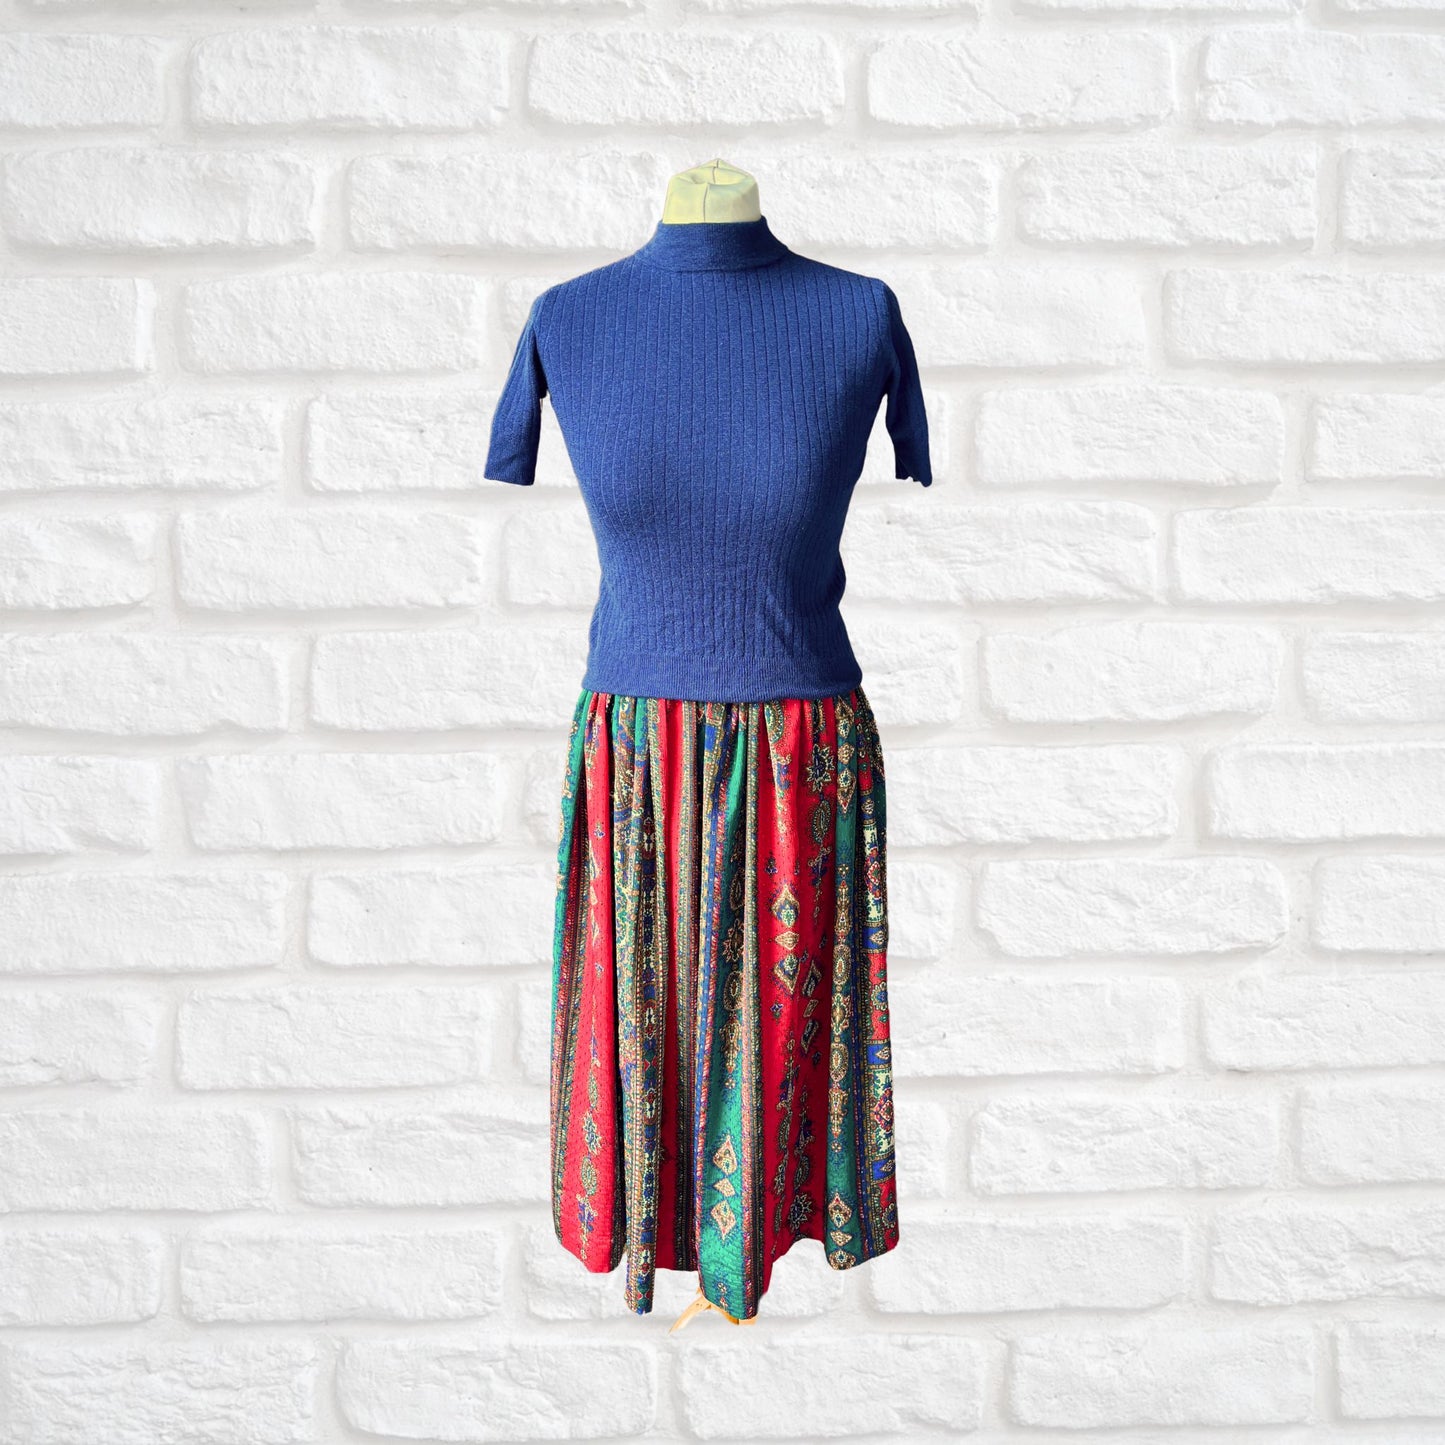 Vintage Paisley Silky Midi Skirt in Red, Green, White, and Blue. Approx UK size 10-12